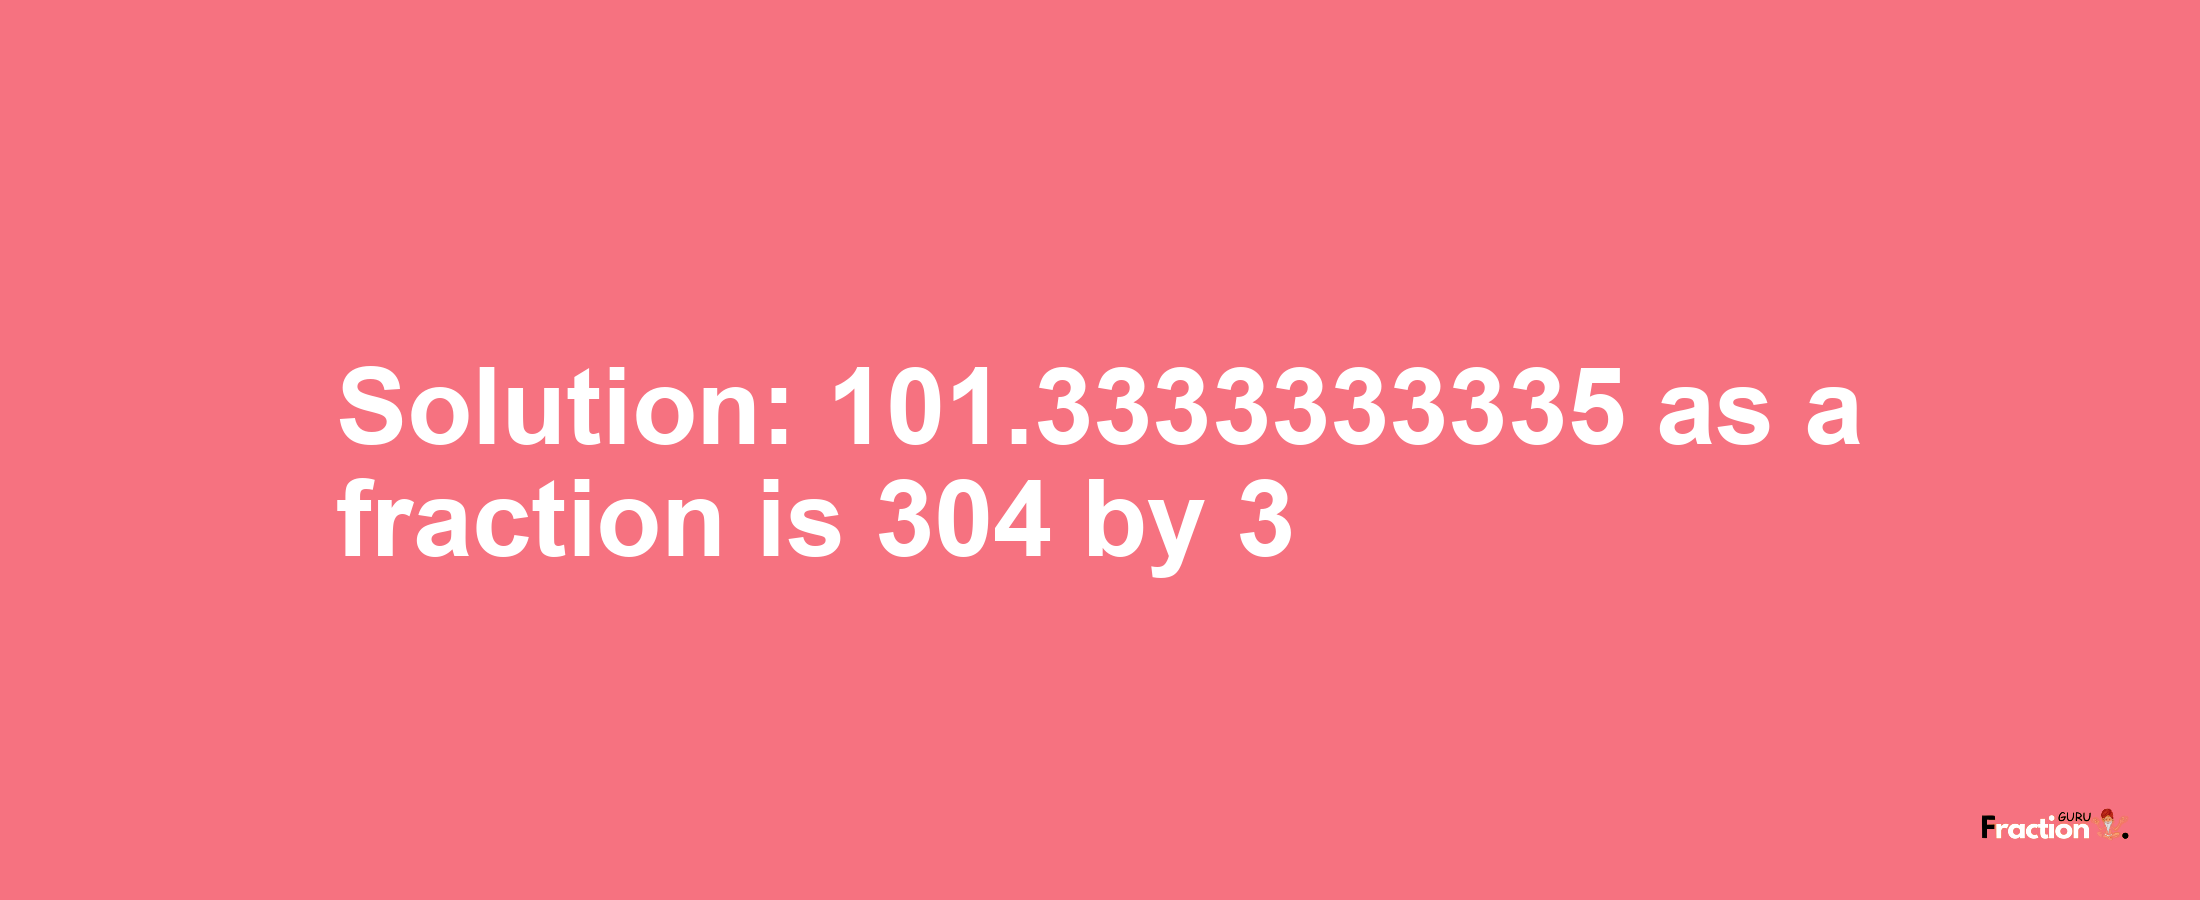 Solution:101.3333333335 as a fraction is 304/3